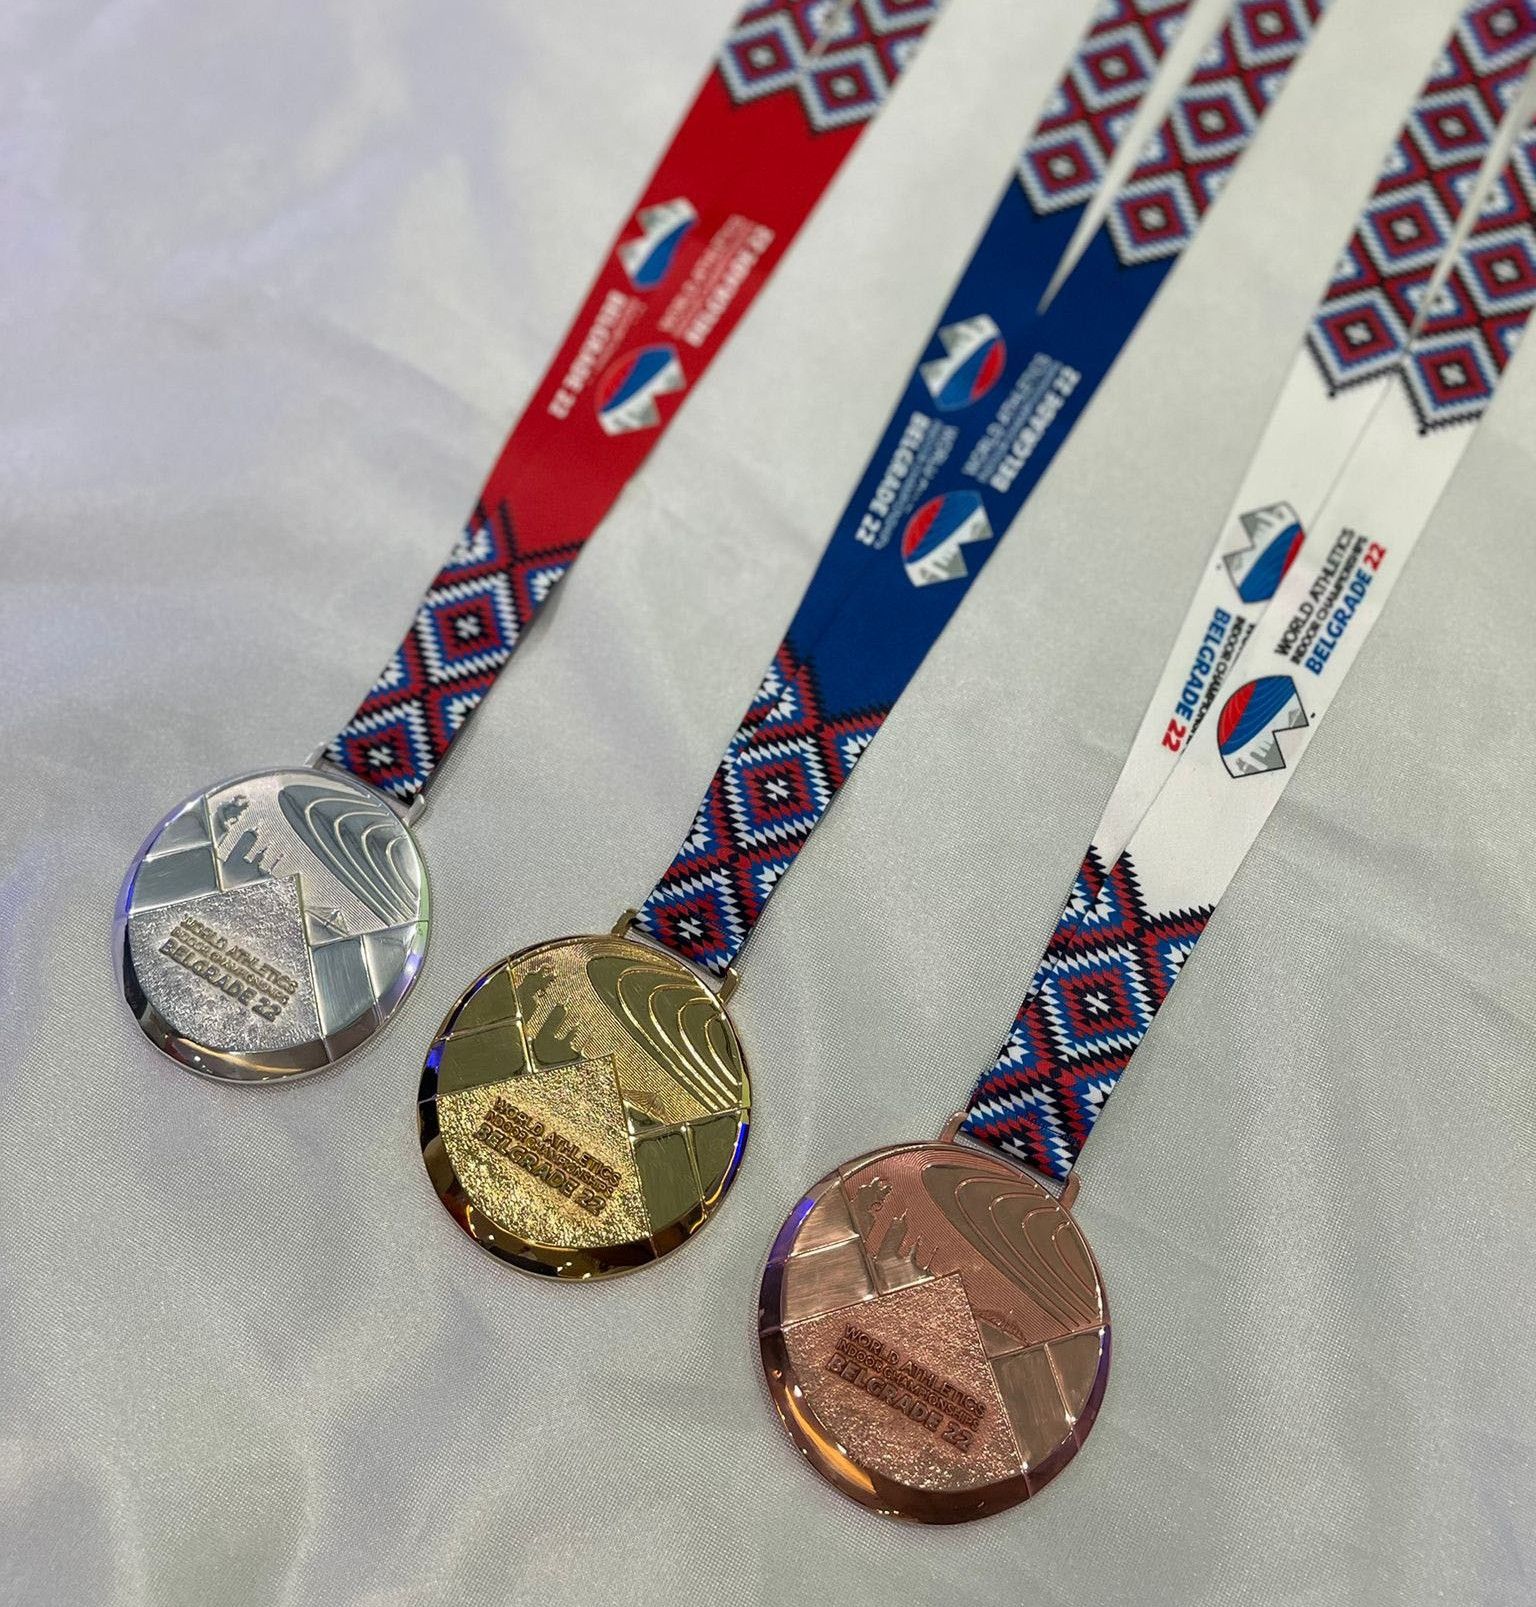 Medals unveiled with one month to go until the World Indoor